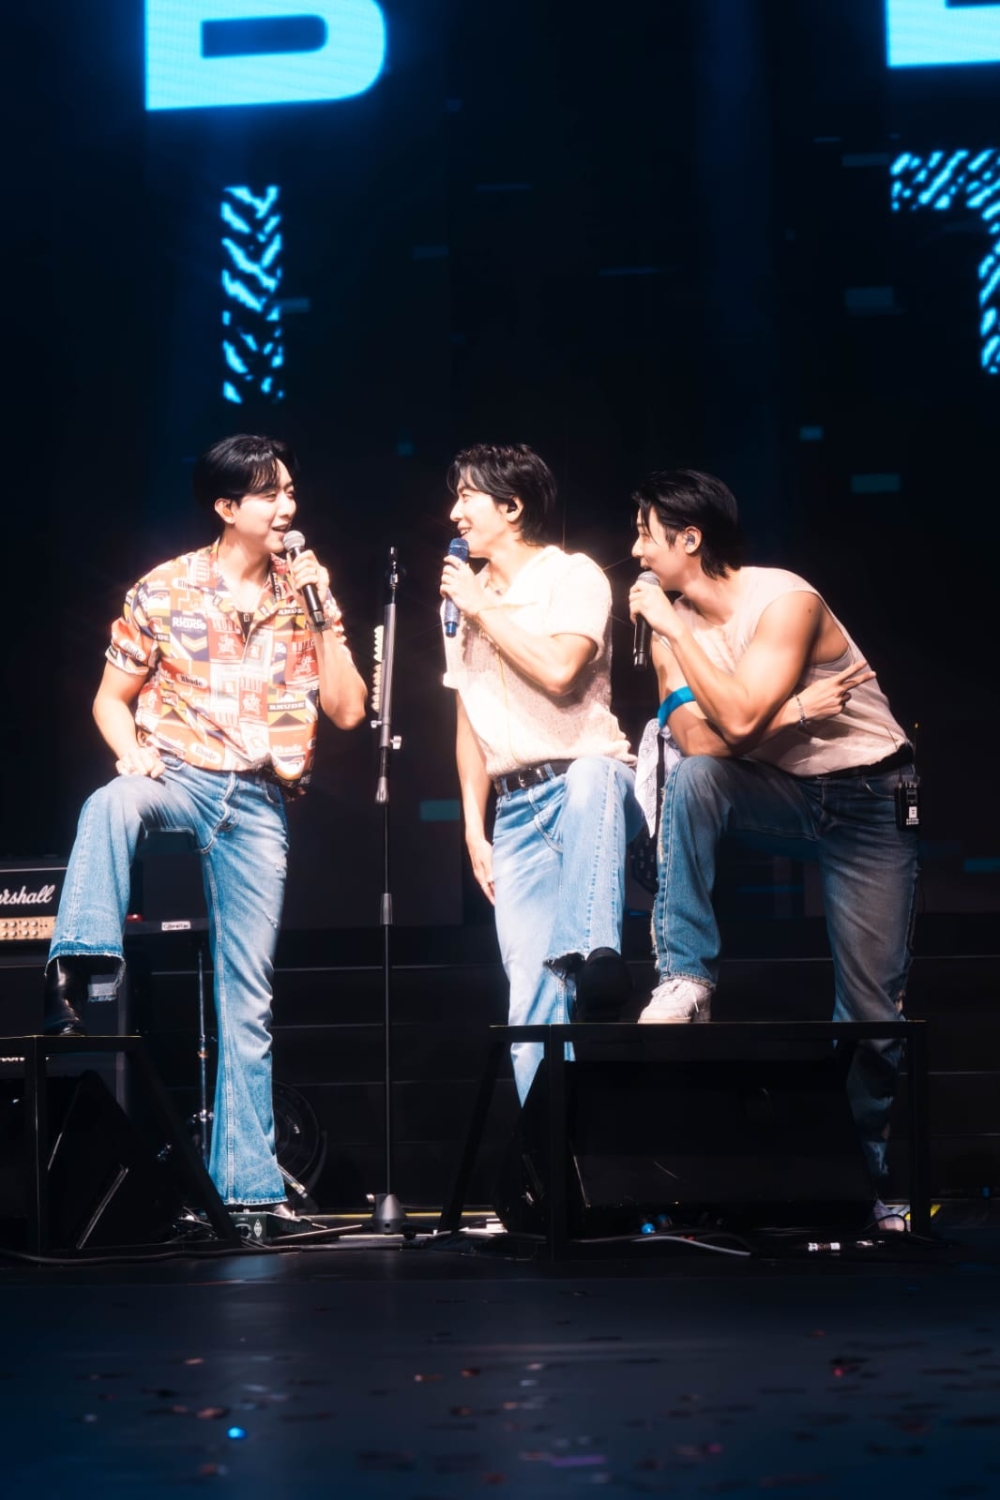 korean band cnblue rocks out 5,000 malaysian fans in memorable comeback after nearly 10 years